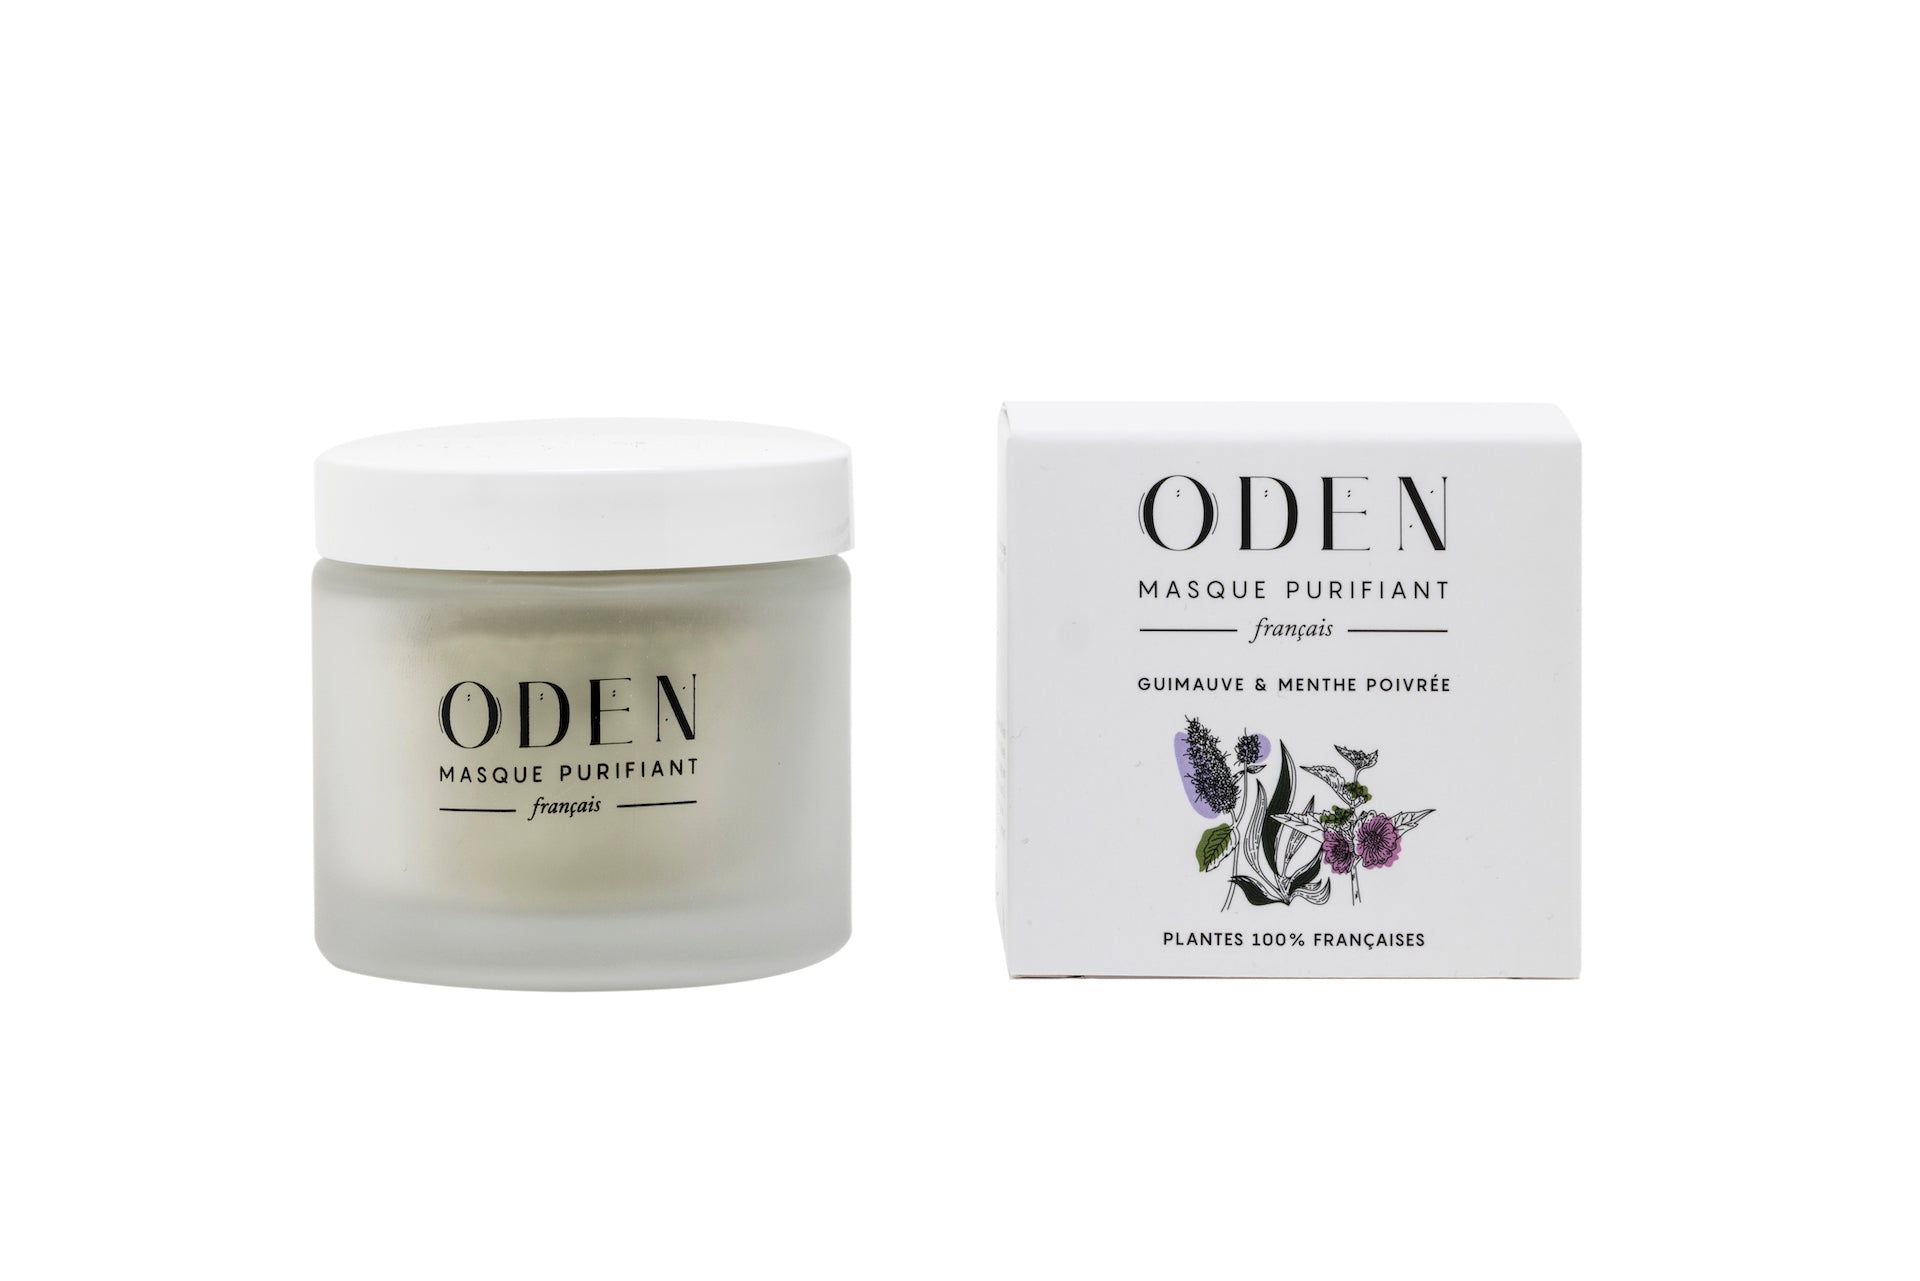 Oden Masque Purifiant